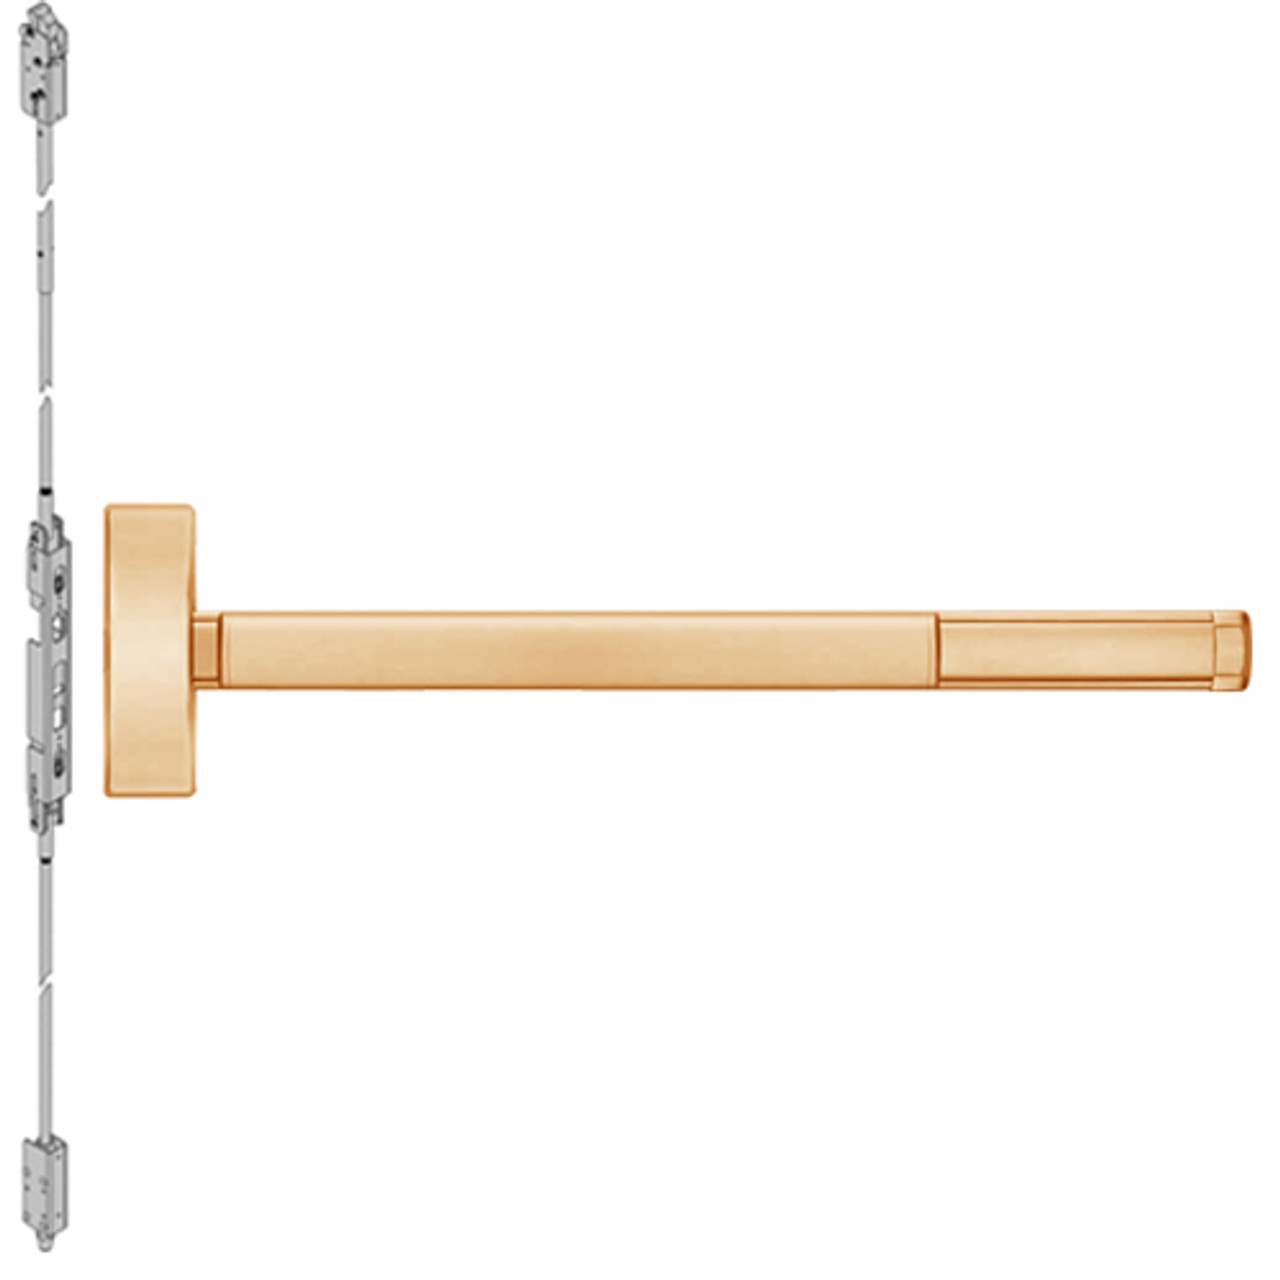 DEFL2805LBR-612-36 PHI 2800 Series Fire Rated Concealed Vertical Rod Exit Device with Delayed Egress Prepped for Key Controls Thumb Piece in Satin Bronze Finish